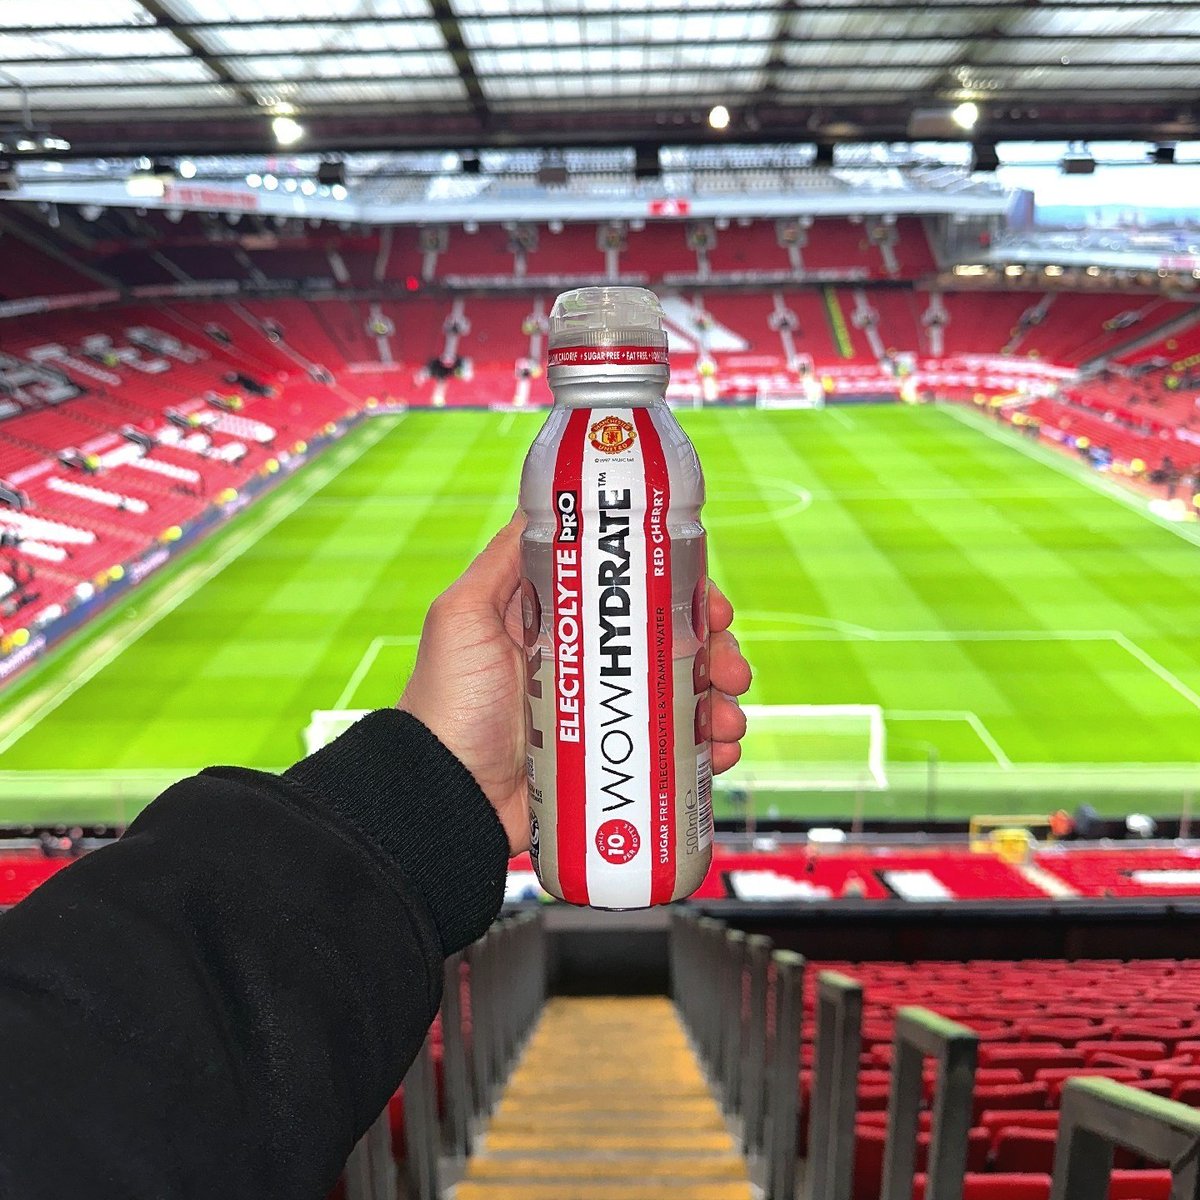 Did you see our NEW Red Cherry flavoured Electrolyte PRO water at Old Trafford Yesterday? 💧🍒 With @manchesterunited we've created the ultimate hydration drink to help everyone be their best, on and off the pitch! 💪 Find out when it is being released and more 👀 #NewRelease